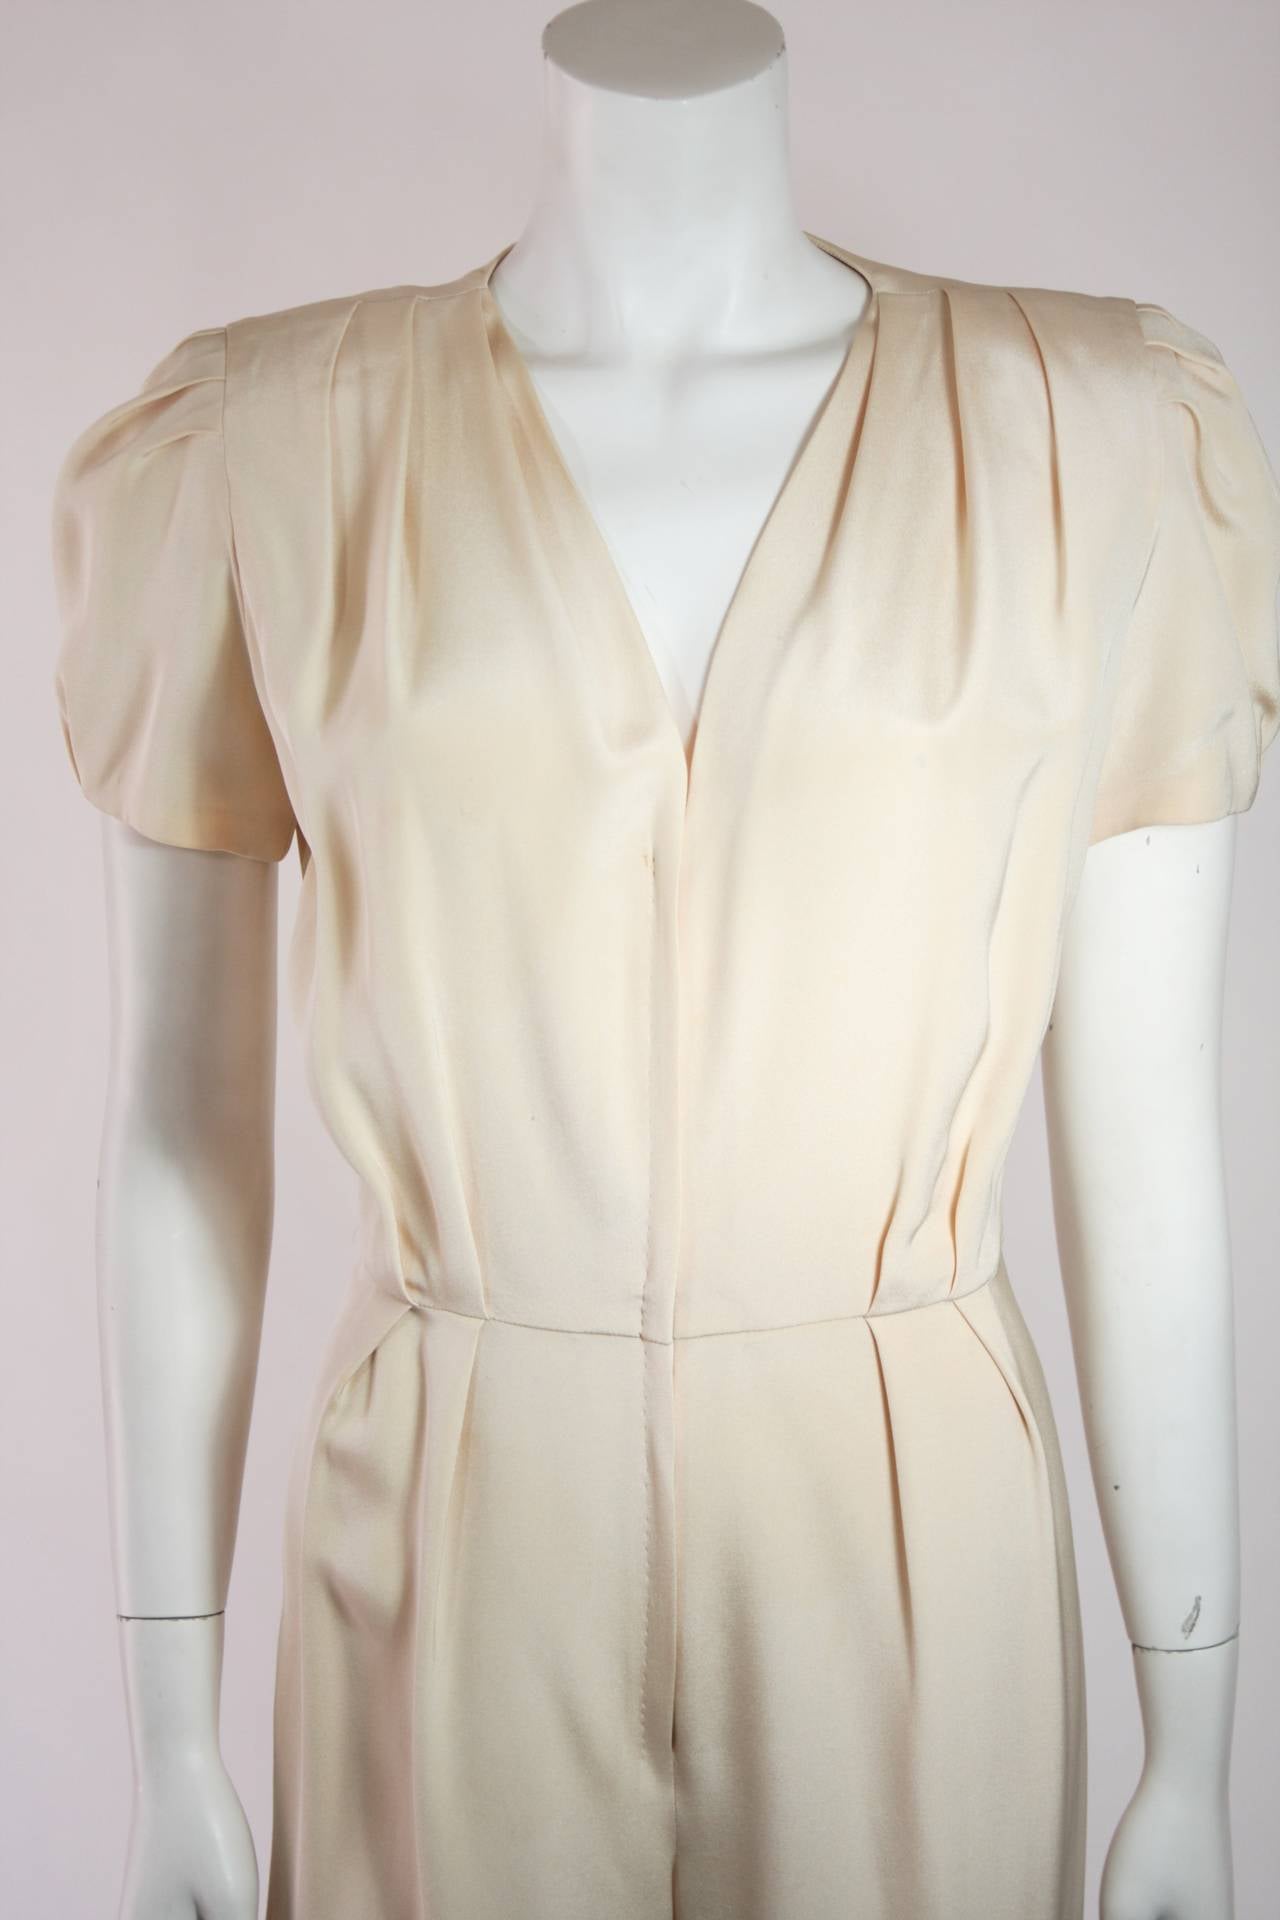 Nolan Miller Attributed Silk Jumpsuit Ensemble with Coat For Sale 2